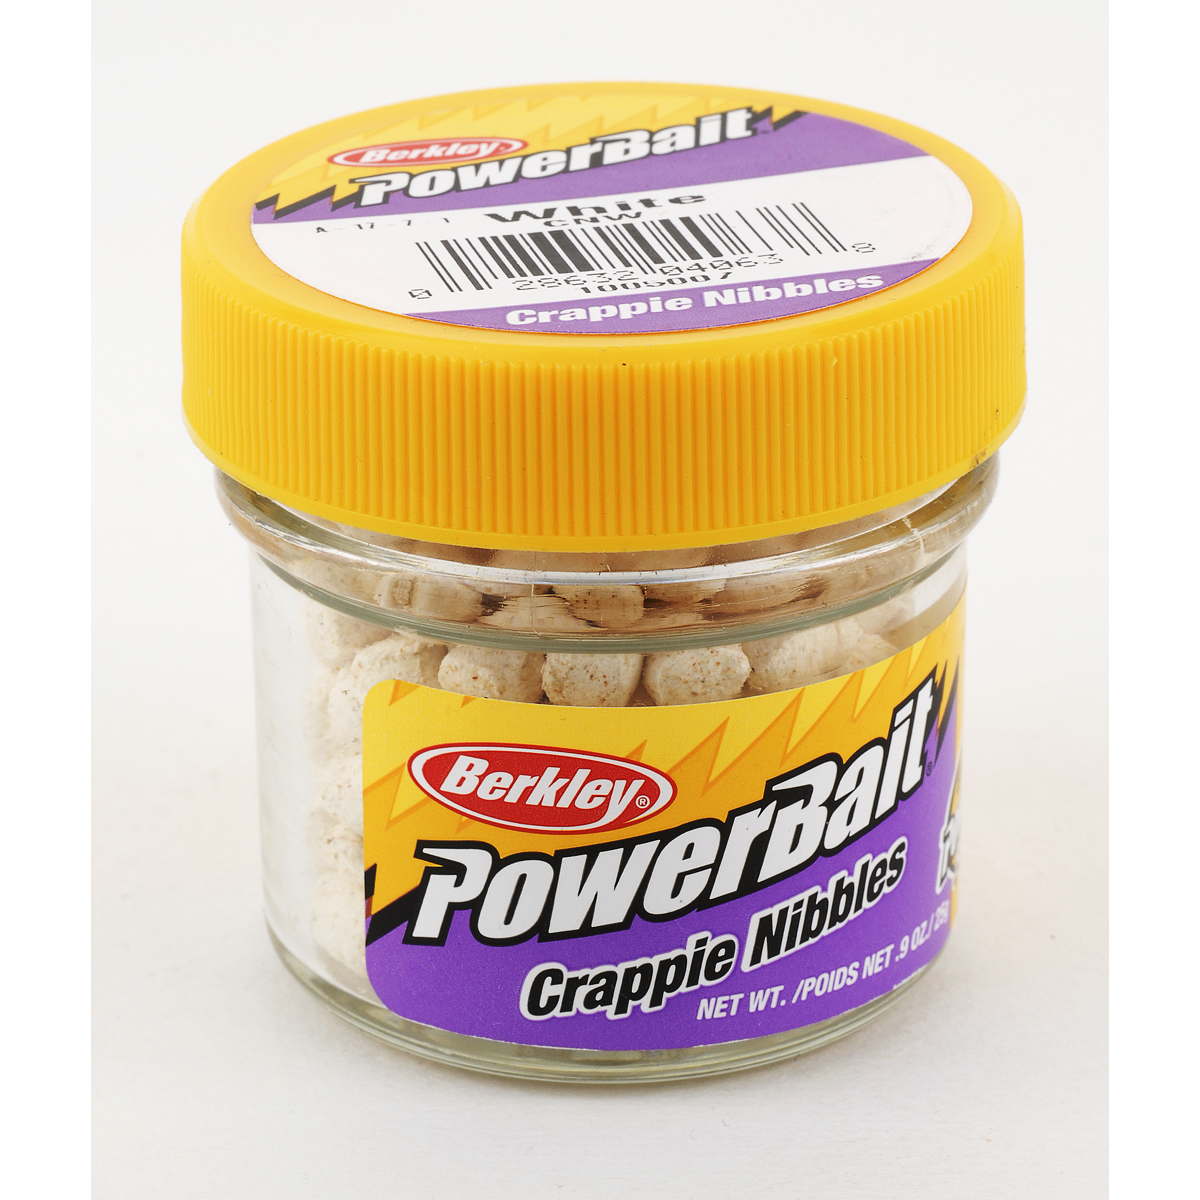 Photo of Berkley PowerBait Crappie Nibbles for sale at United Tackle Shops.